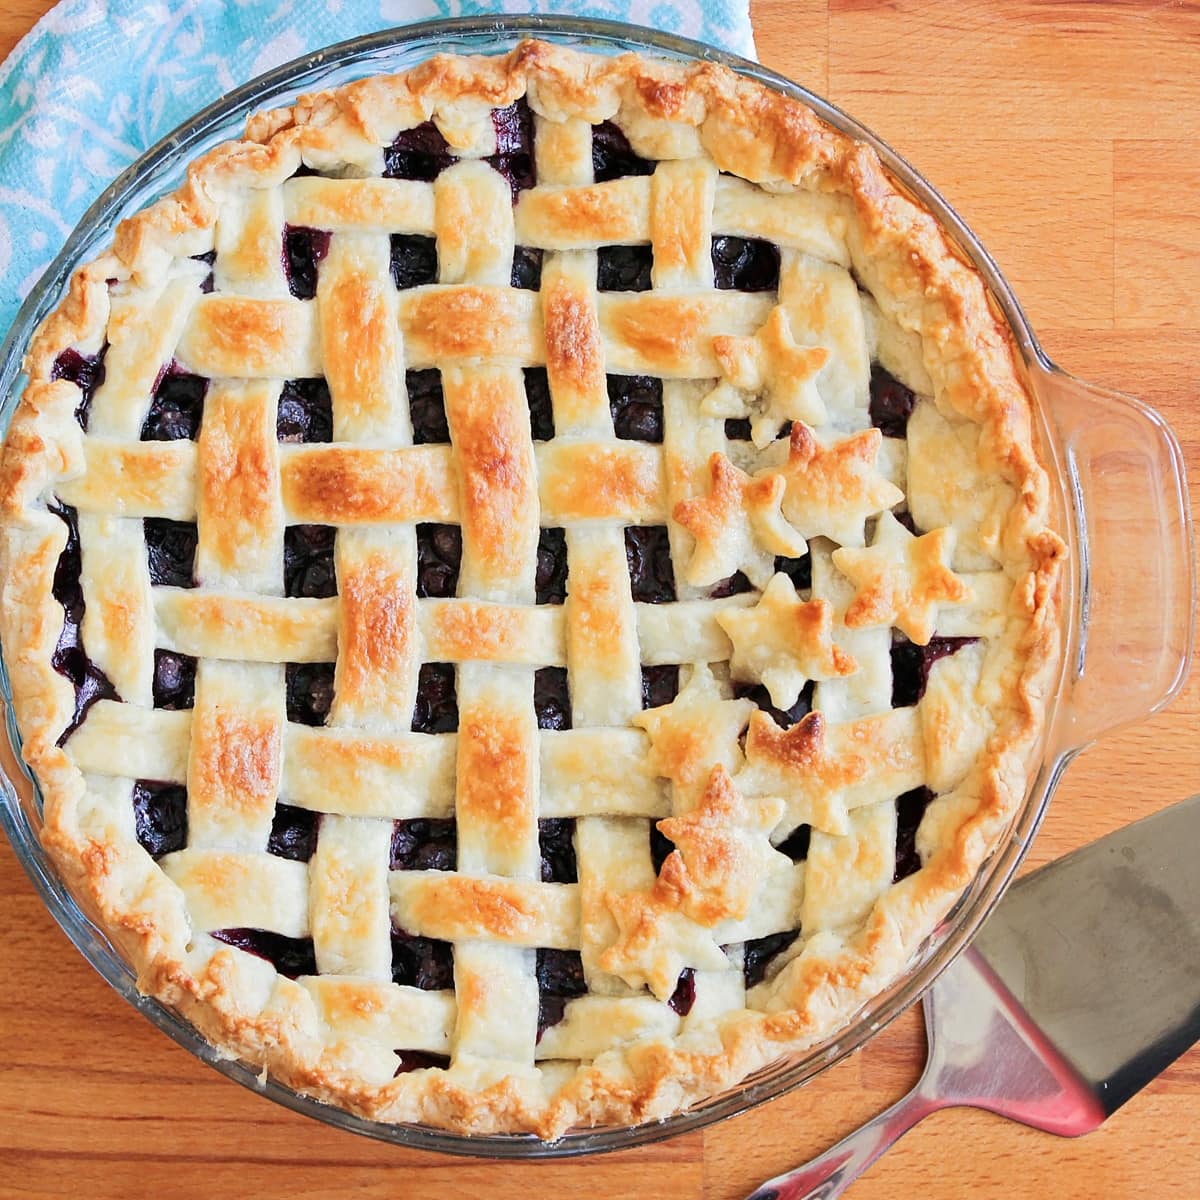 Top view of a fresh blueberry pie with a lattice crust.